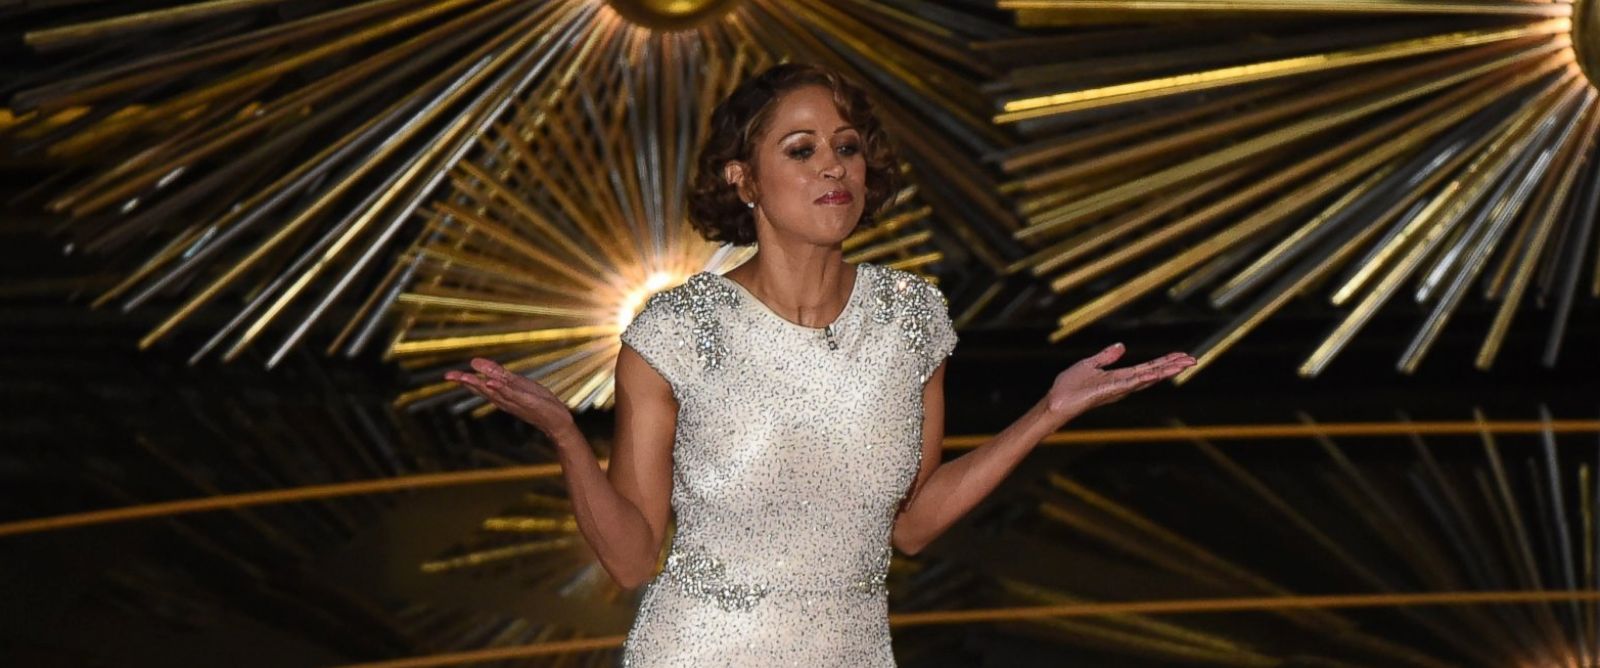 Stacey Dash Explains Surprise Appearance At Oscars We